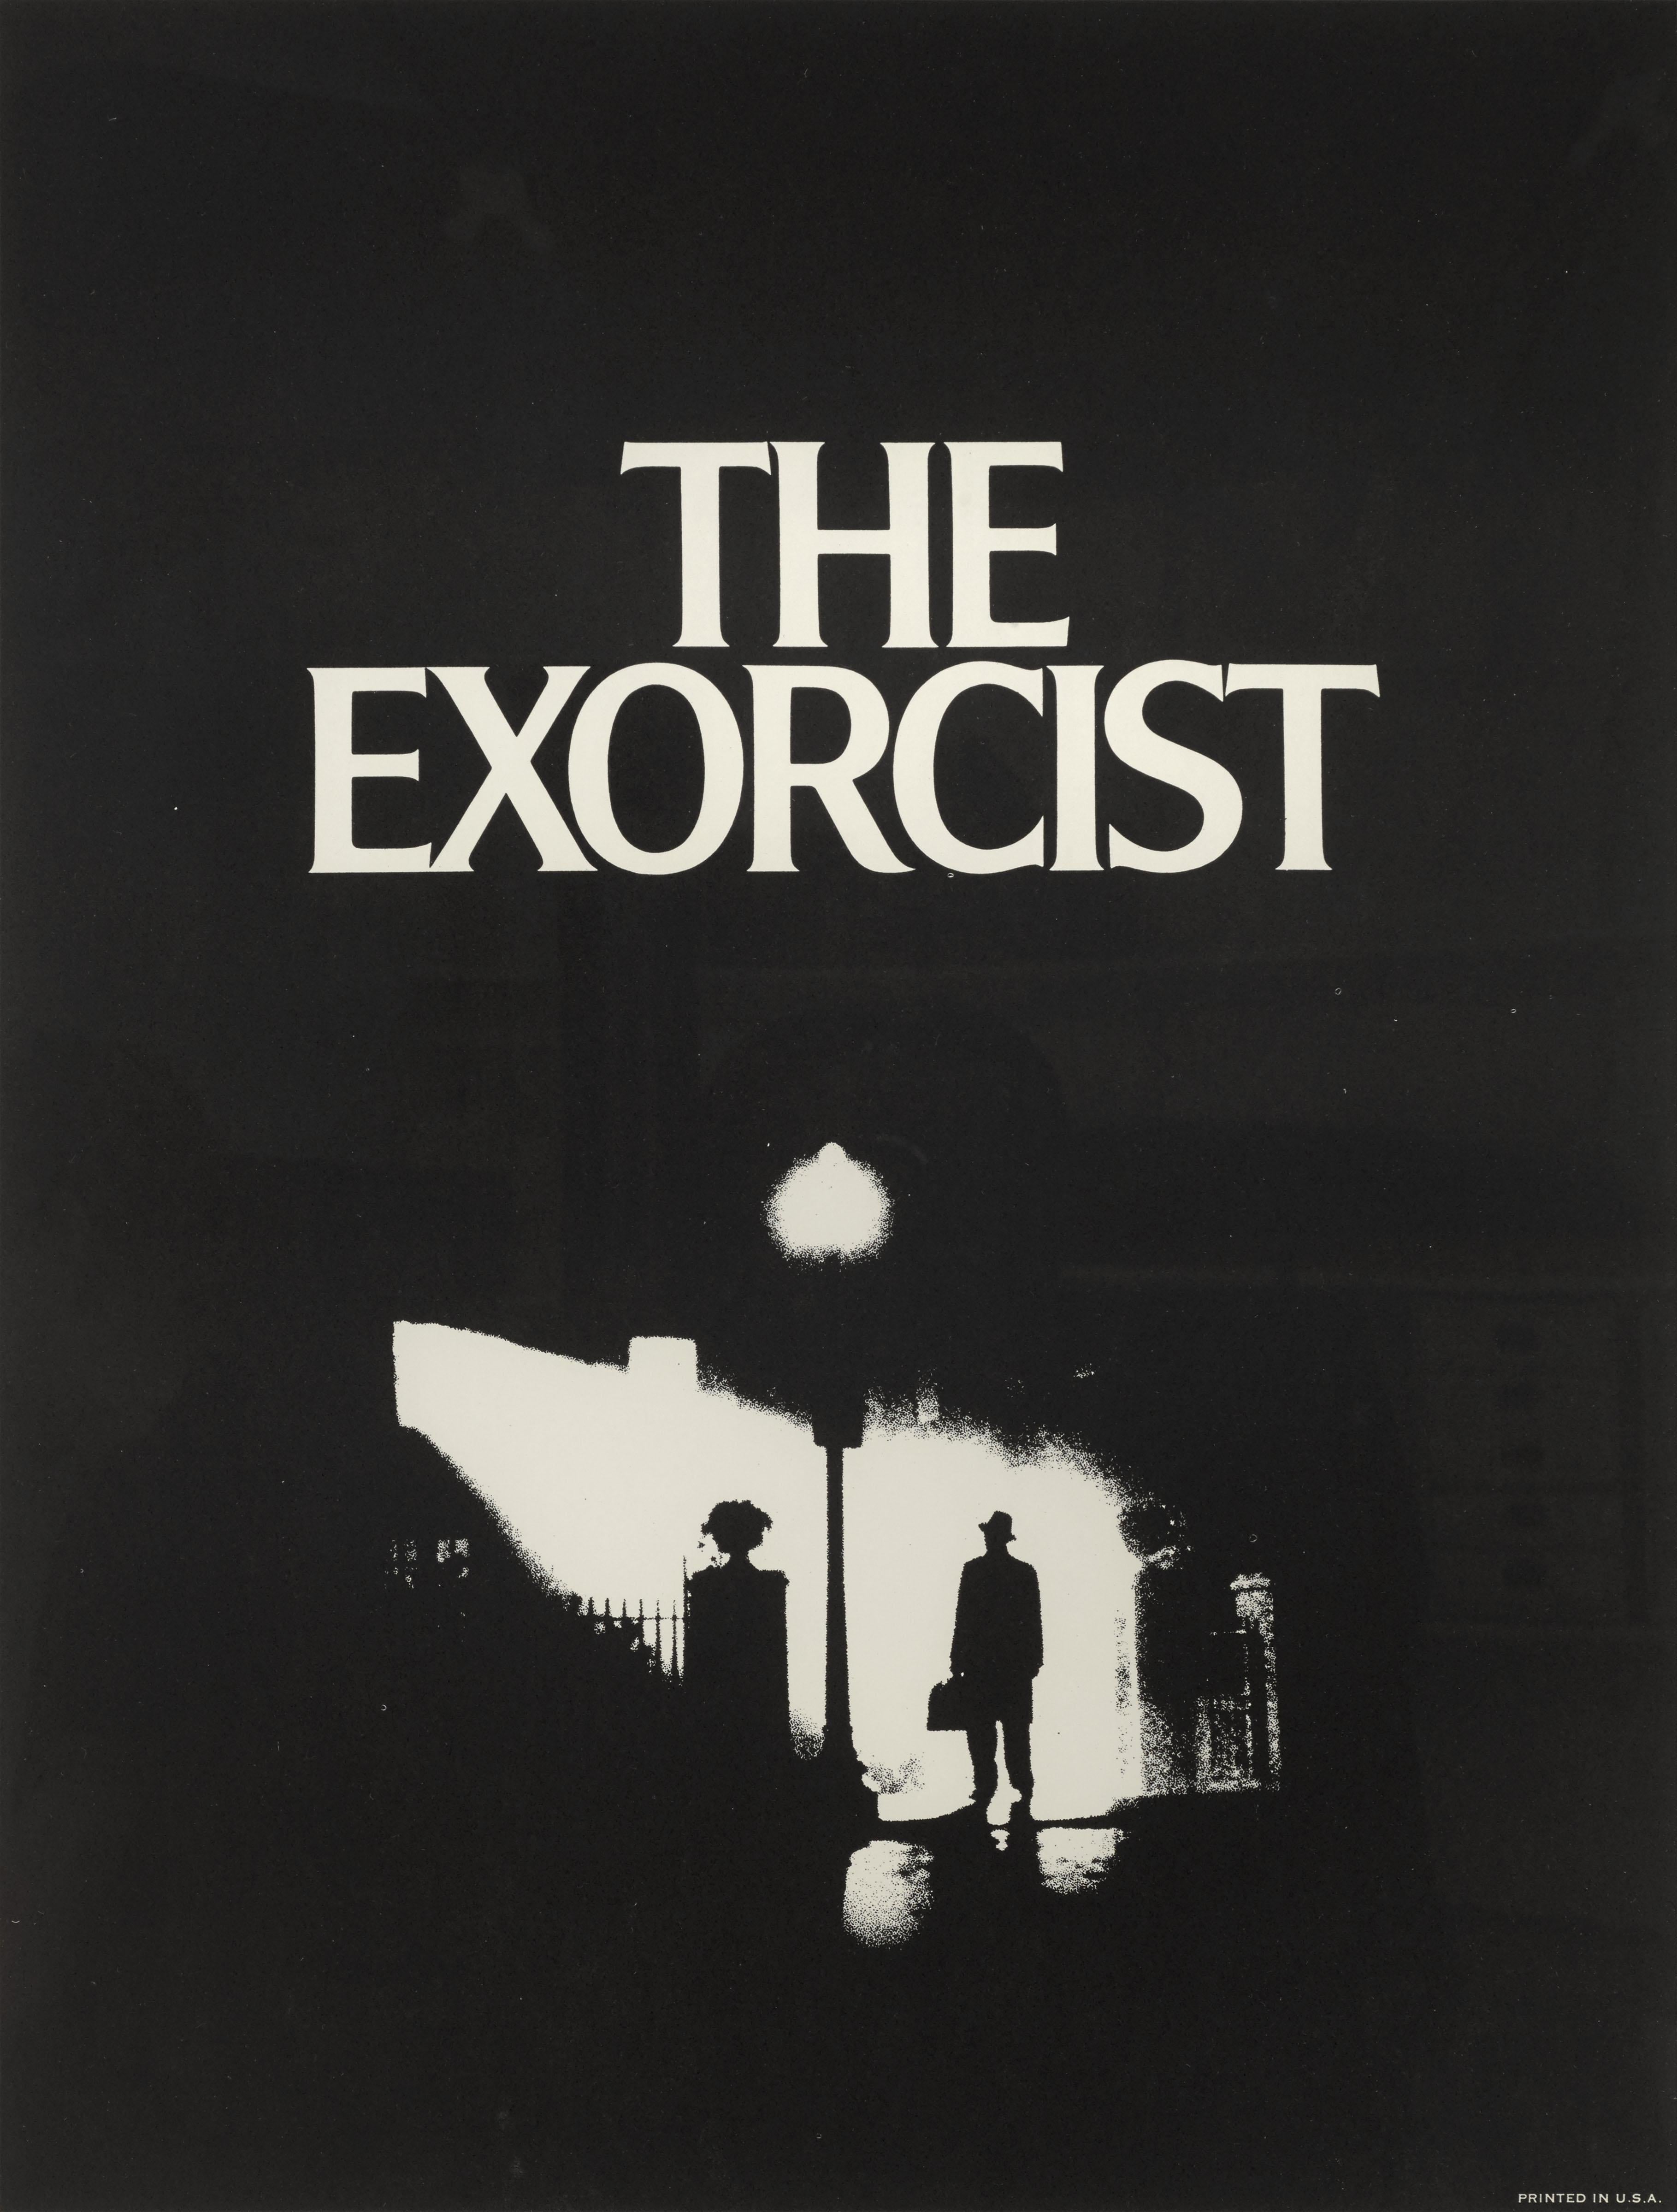 Original US special style film poster for the classic 1973 horror film The Exorcist, directed by William Friedkin and starred Ellen Burstyn, Max von Sydow 
This piece is conservation linen backed and conservation framed in an Obeche wood frame with